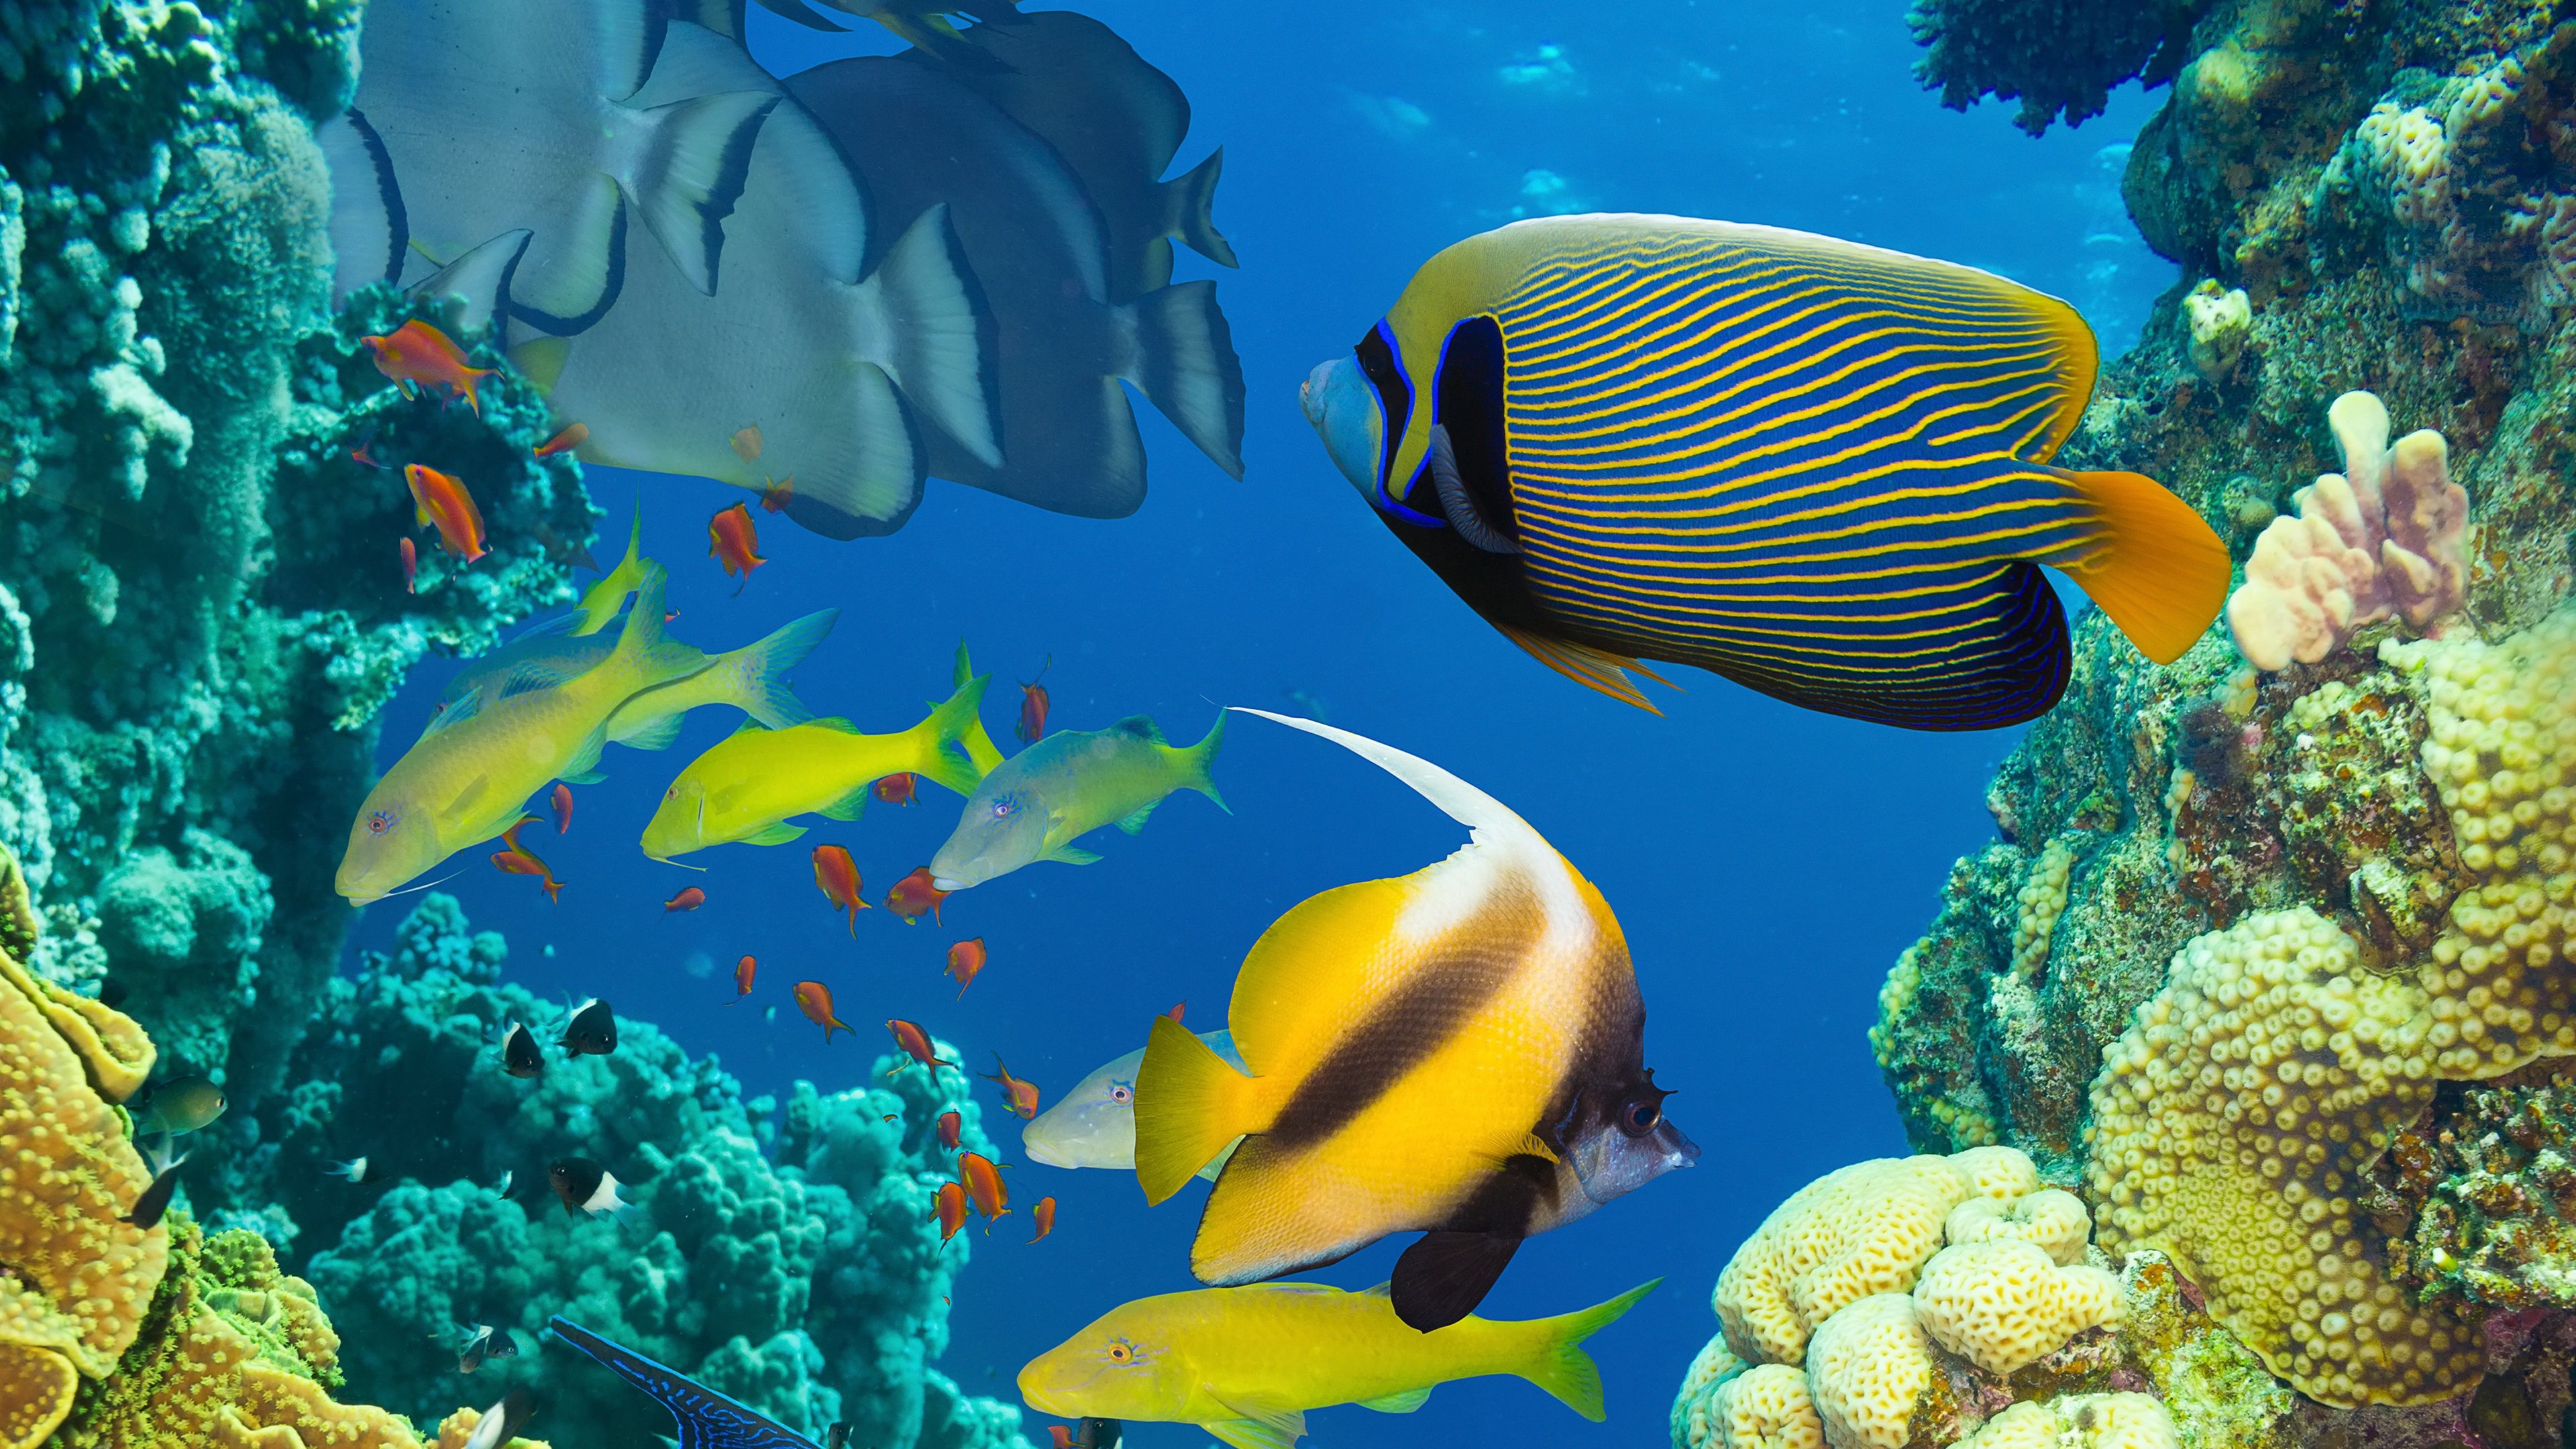 Wallpaper Beautiful fish in the sea, underwater, coral reef 3840x2160 UHD 4K Picture, Image